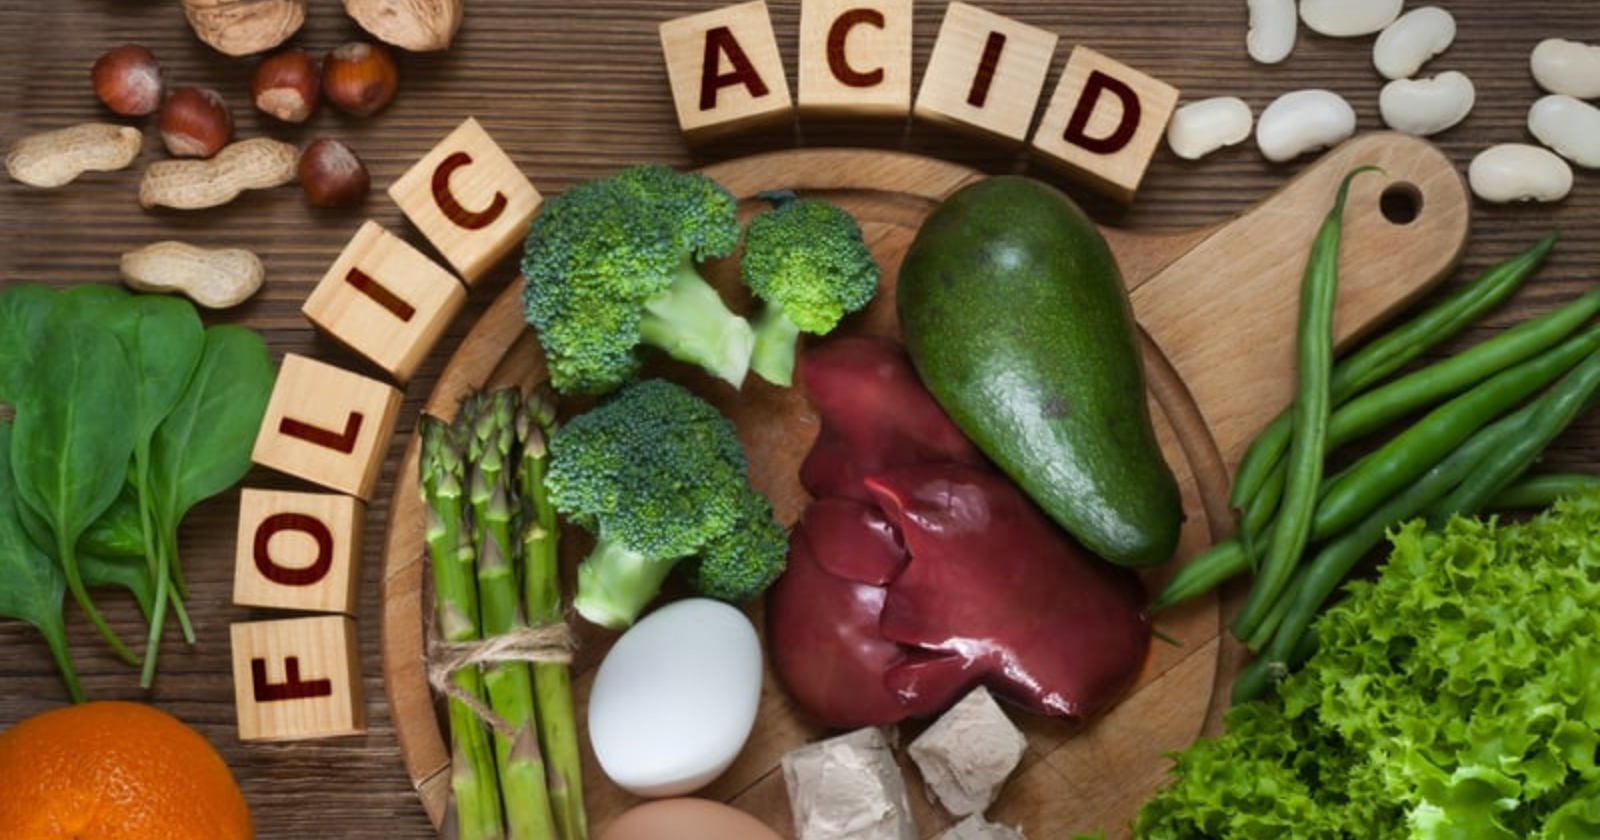 Folate (Folic Acid) Vitamin B9 - Uses, Dosage, Effects, Food Sources, and More